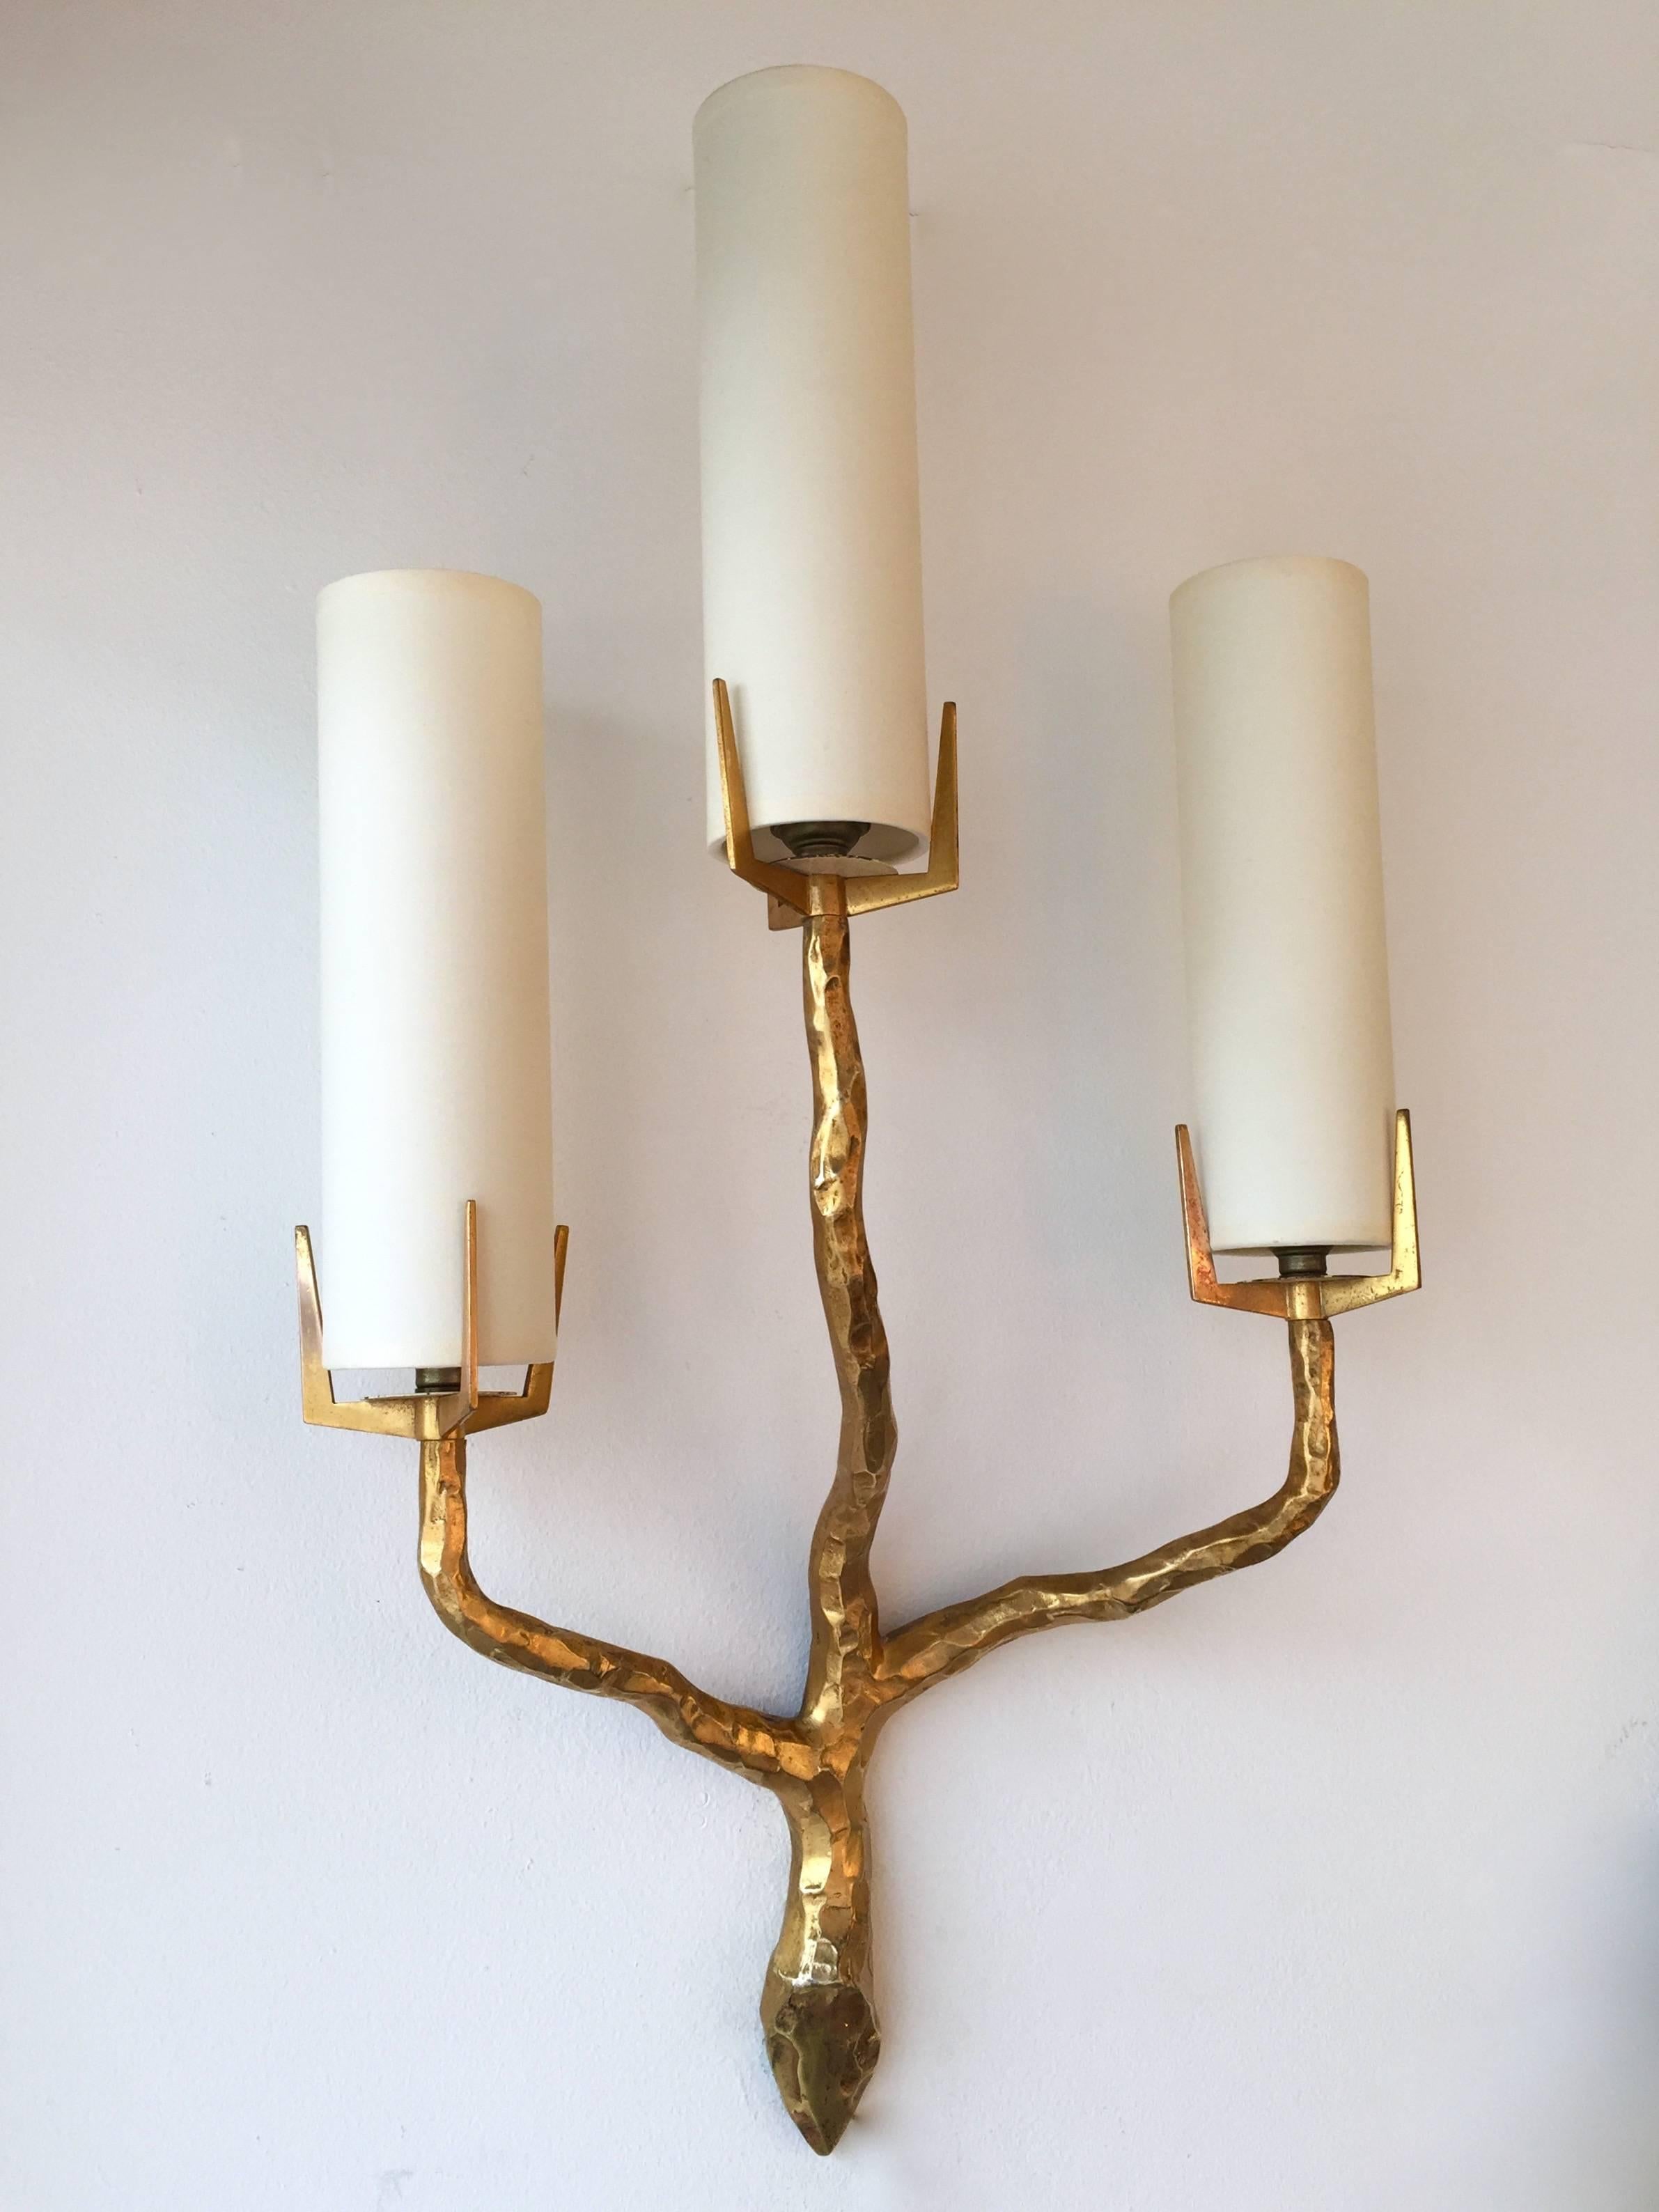 Mid-Century Modern pair of sconces or wall lights by Maison Arlus based on drawing of Felix Agostini for the manufacture. In cast gilt bronze, very interesting three arms model. Original advertising from the 1960s. It’s a famous manufacture like